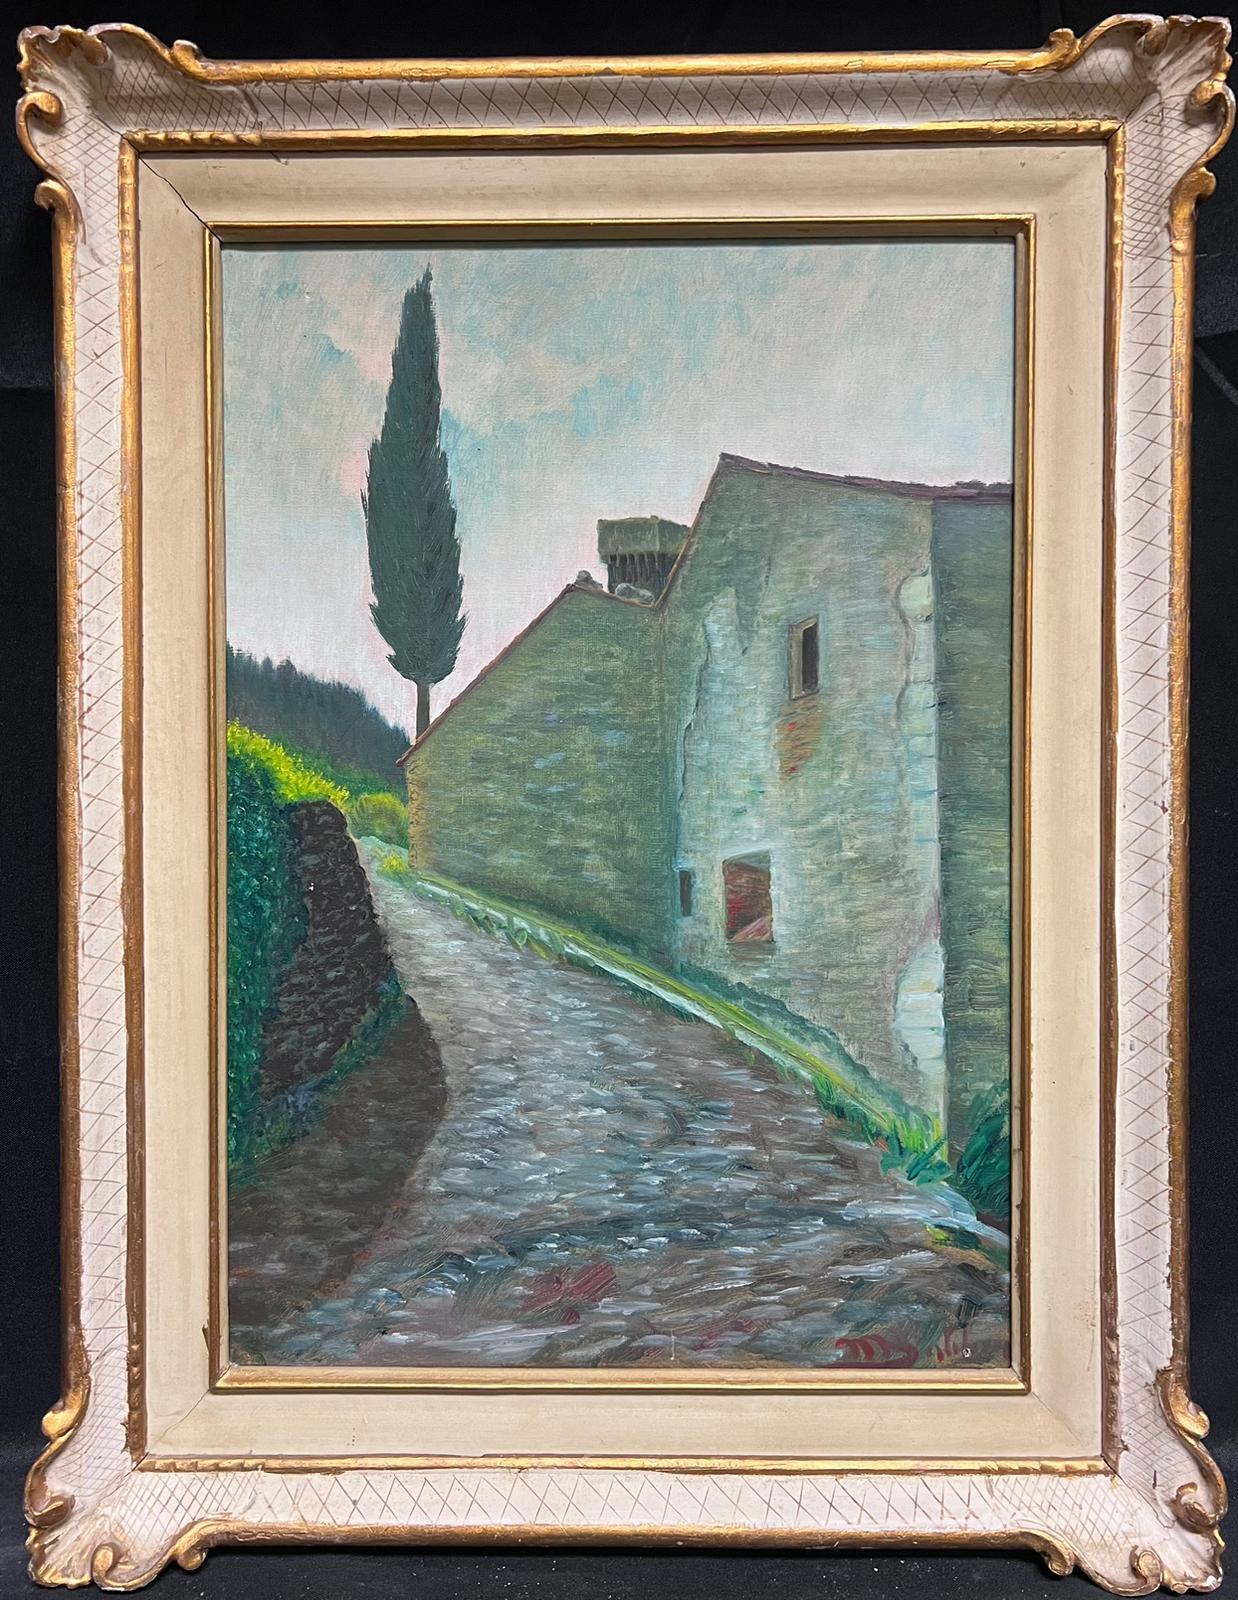 Italian 1950's Landscape Painting - Cypress Tree Old Tuscan Stone Village Houses Winding Lane Signed Oil Painting